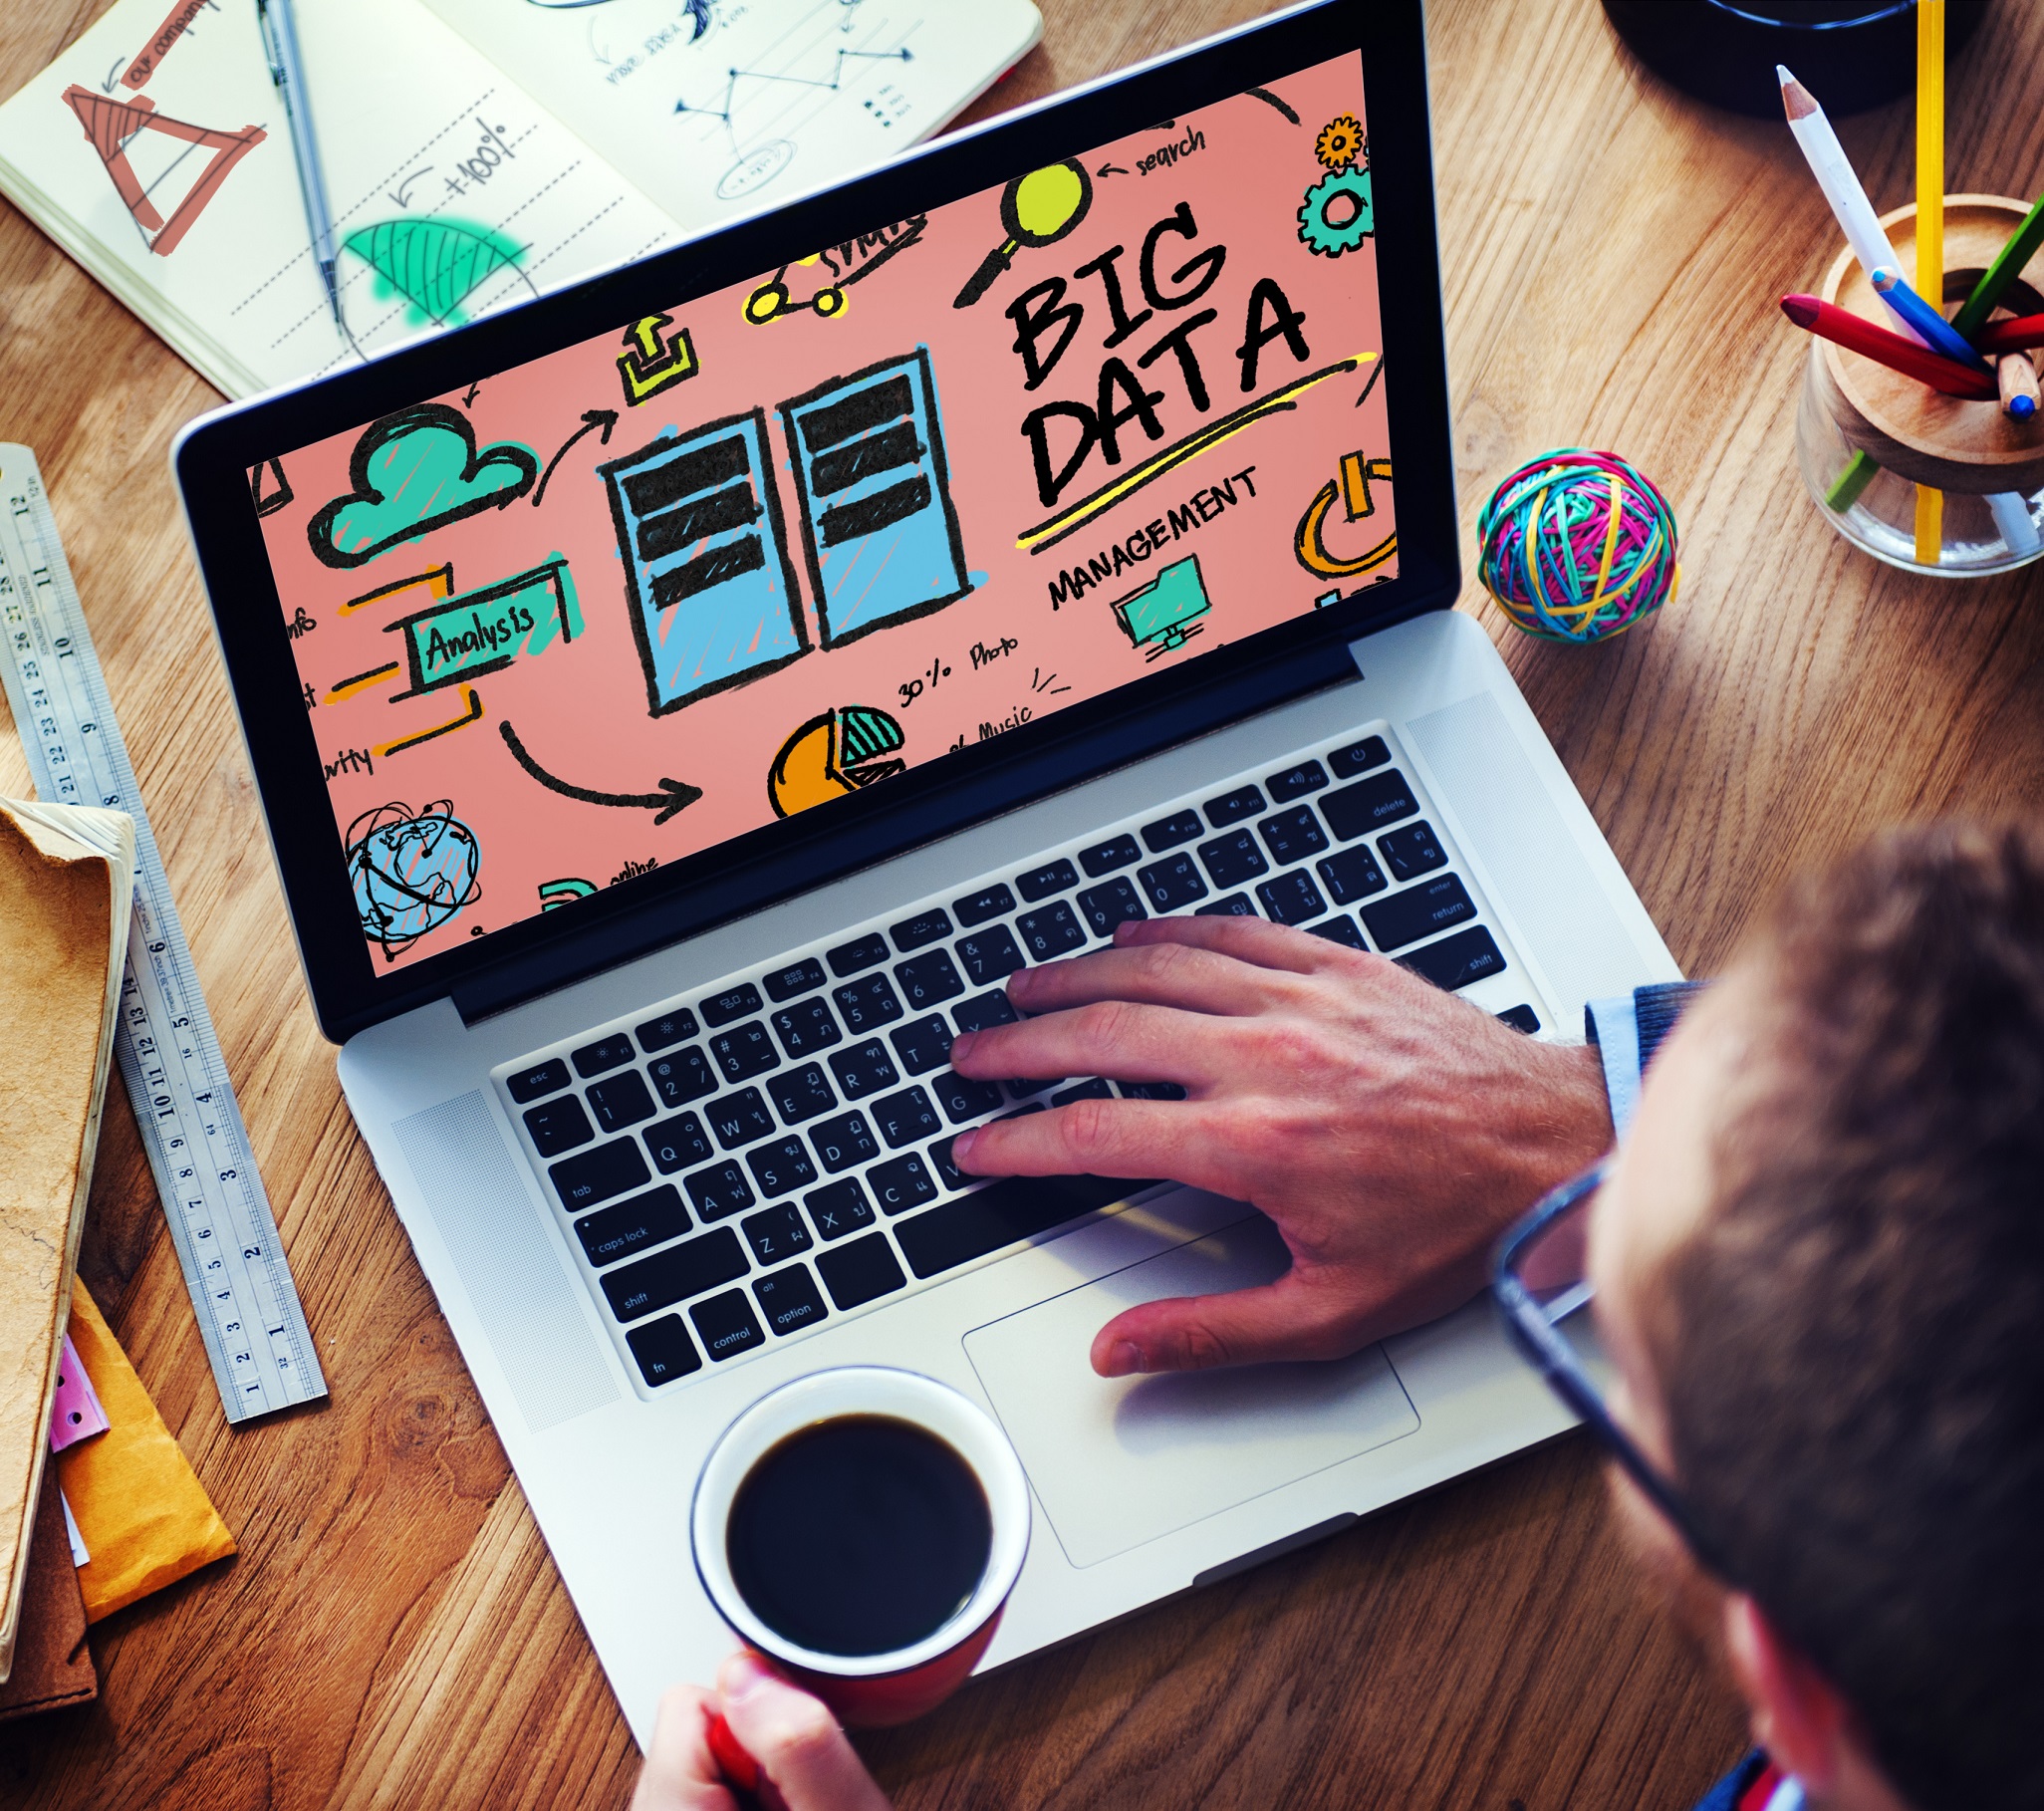 What Small Businesses can do to get the Benefits out of Big Data Analytics